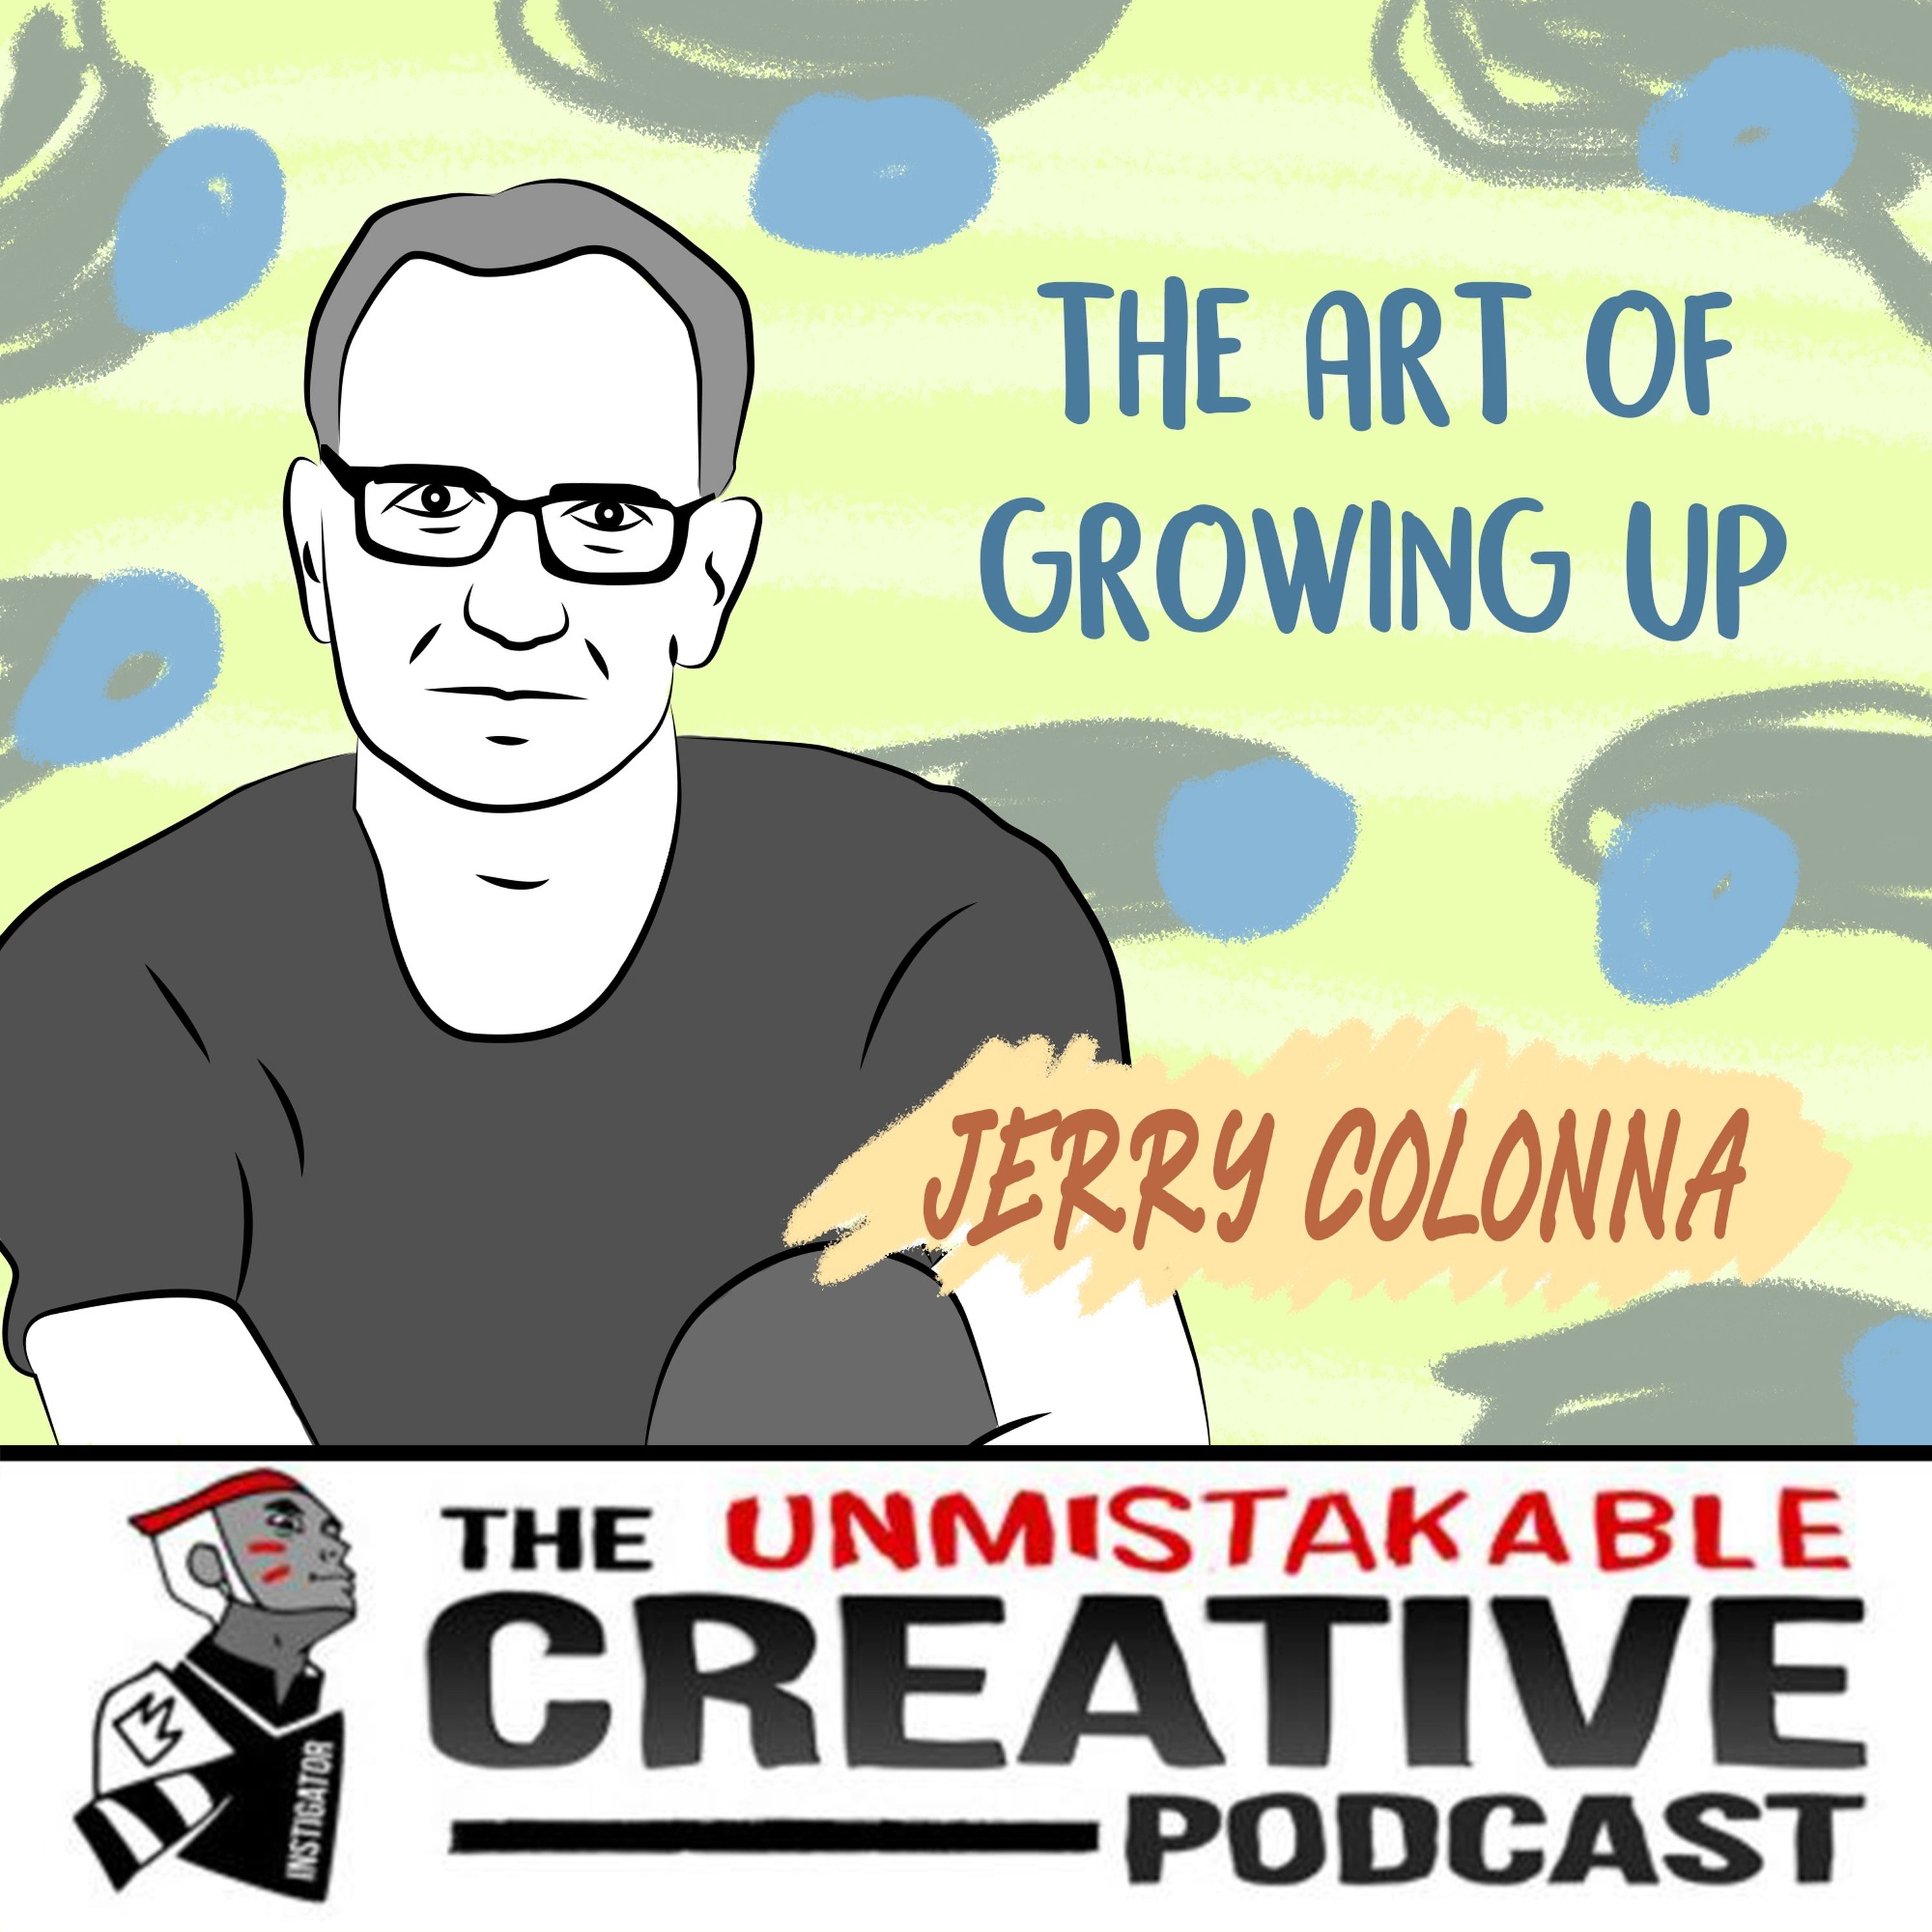 The Art of Growing Up with Jerry Colonna Image